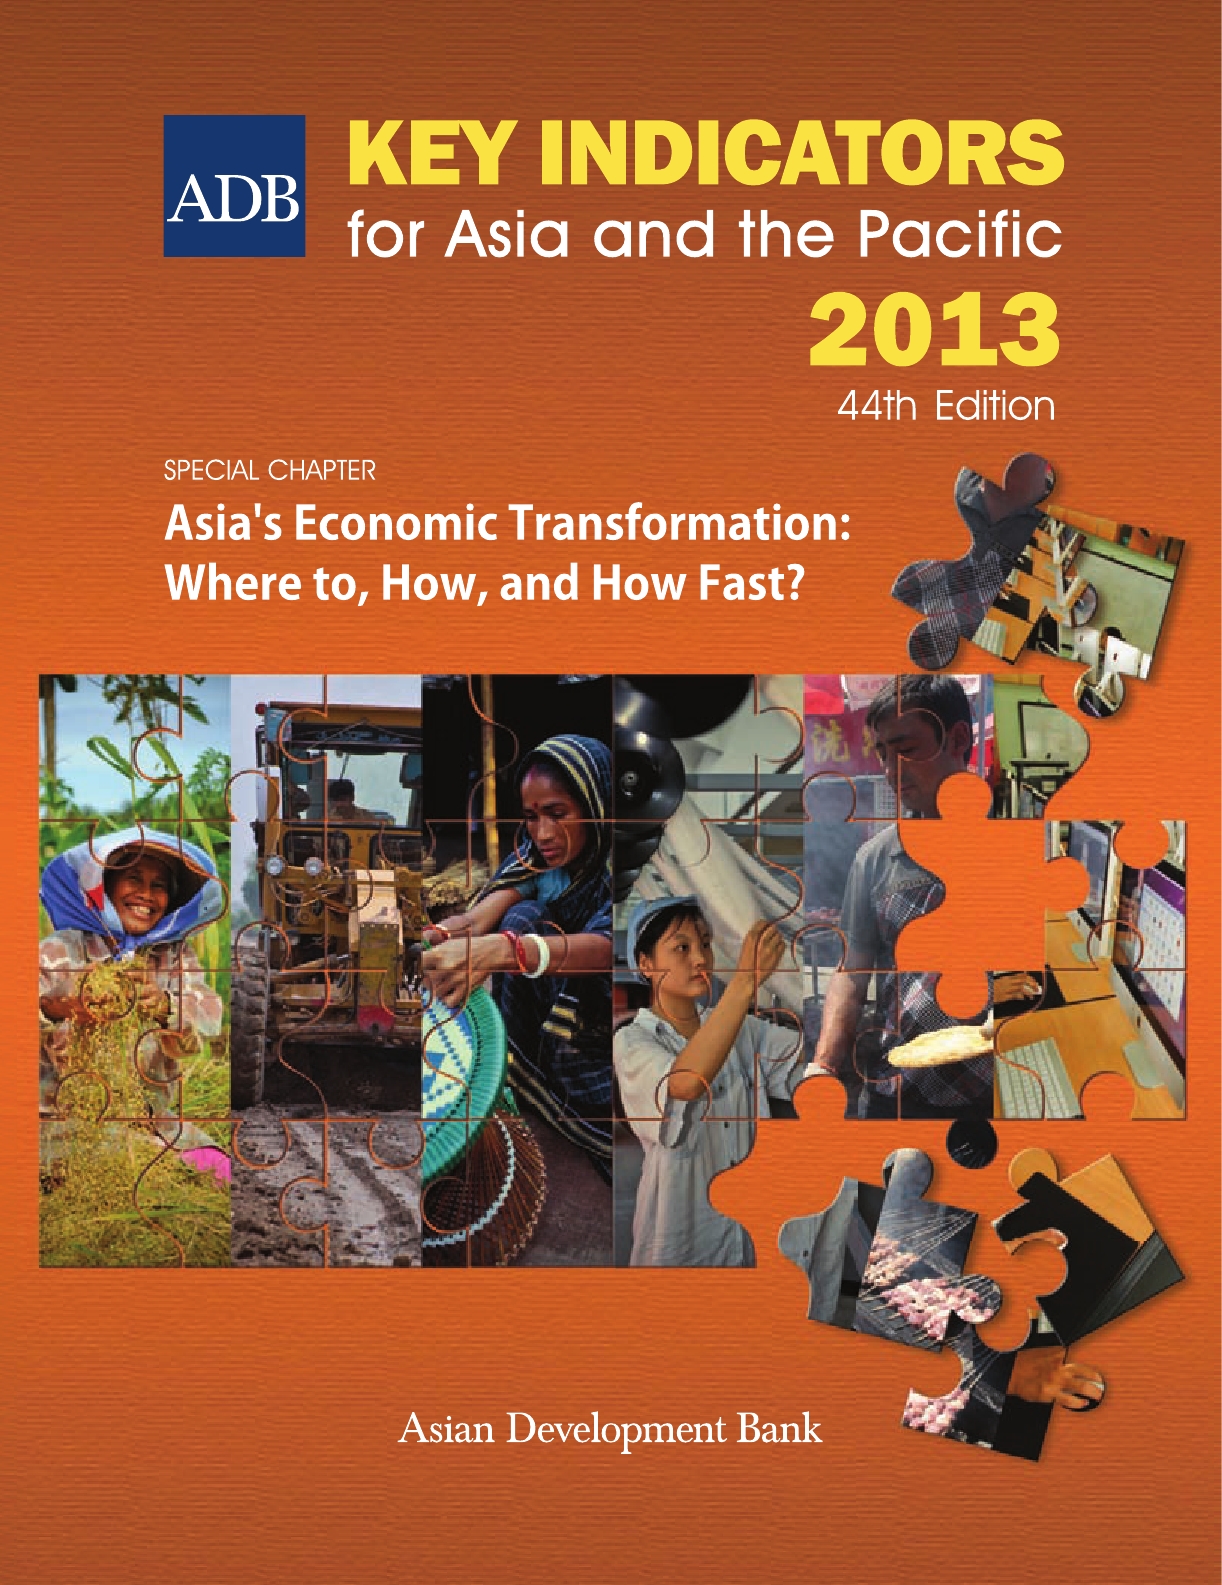 ADB: Key Indicators for Asia and the Pacific 2013